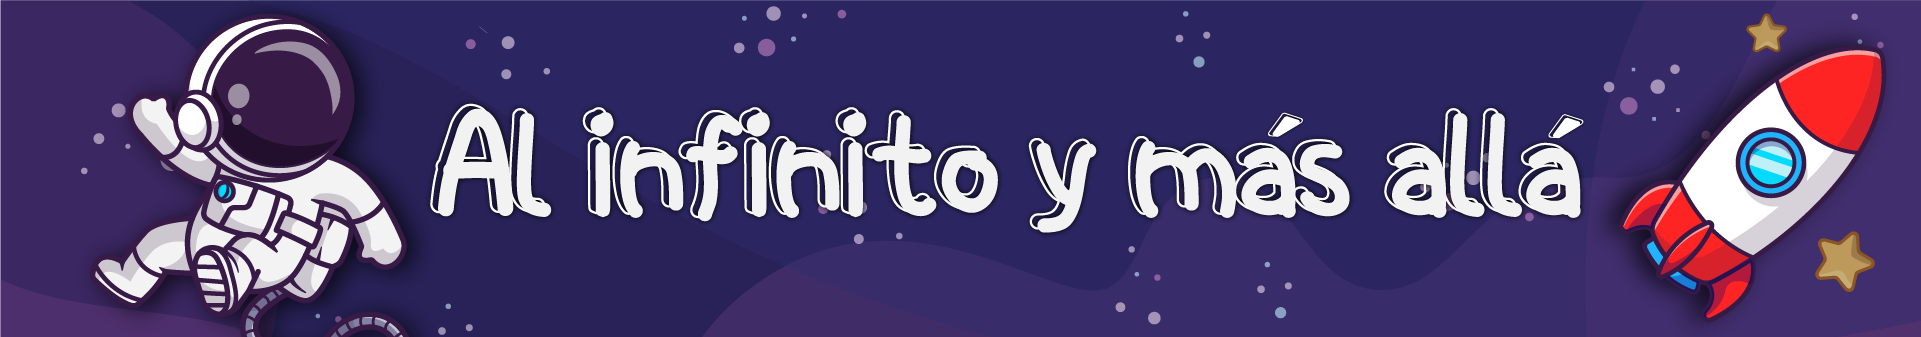 Banner inicial